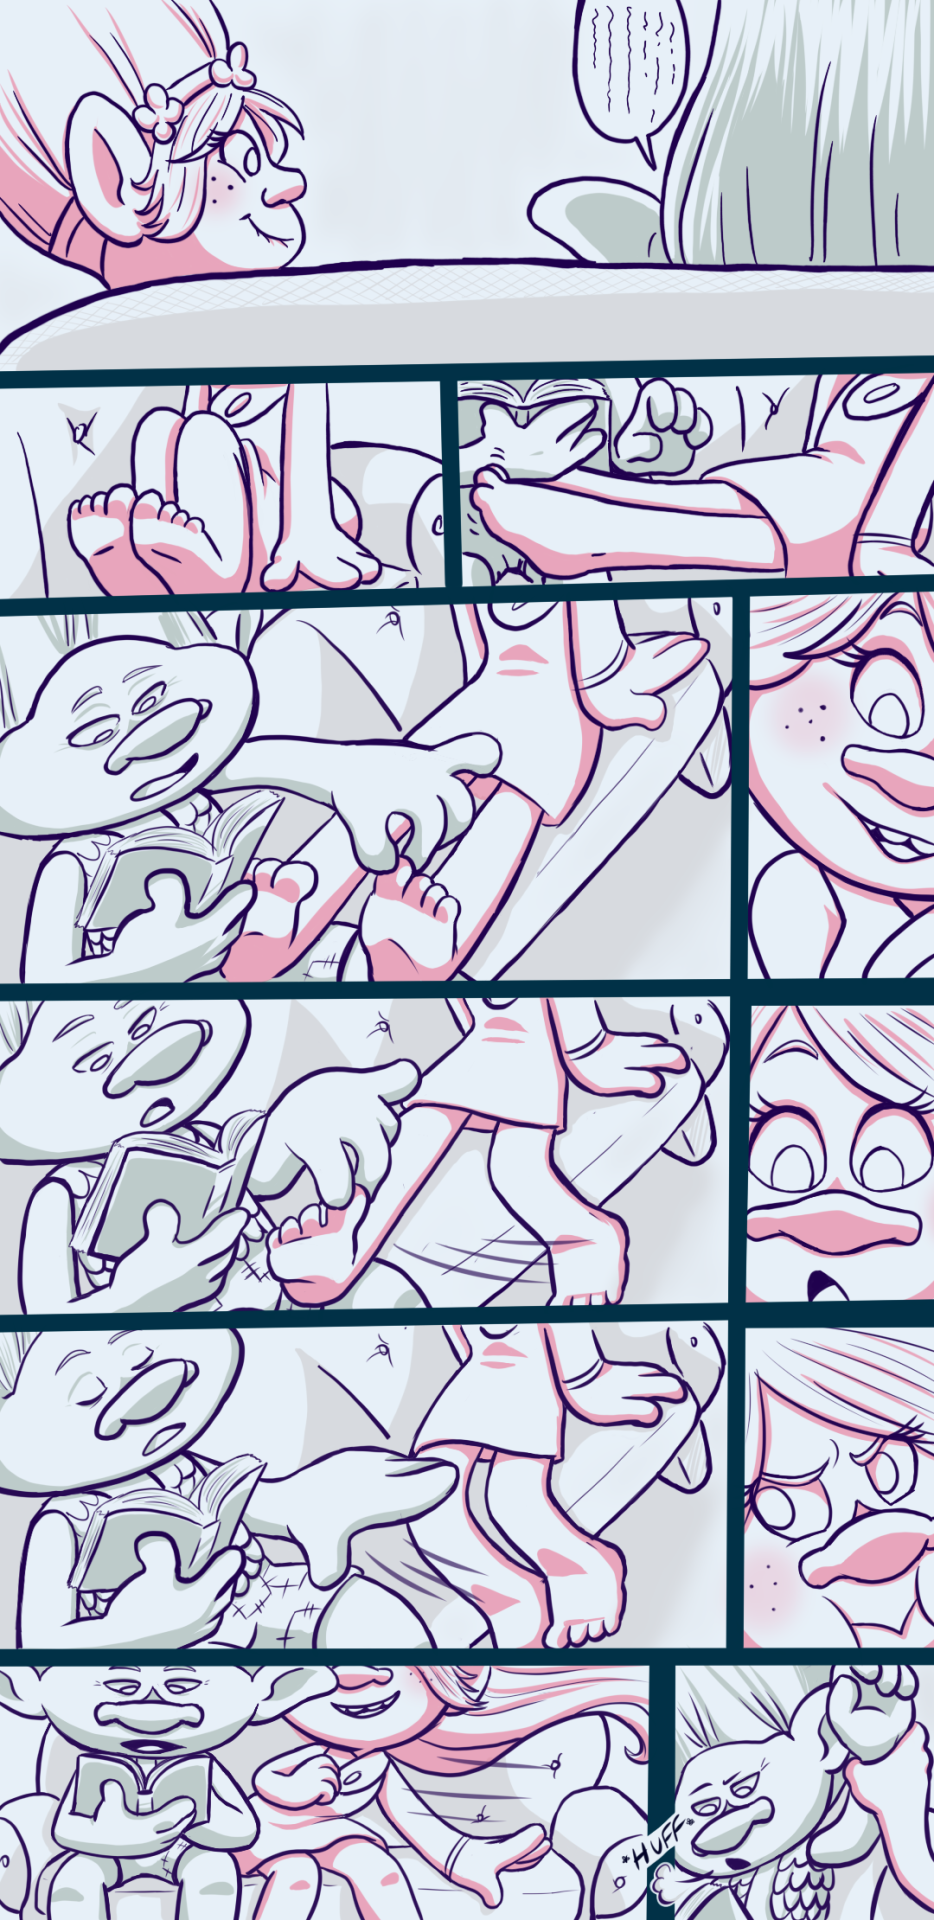 page 3. I might skip over some bits to get to the good stuff XD